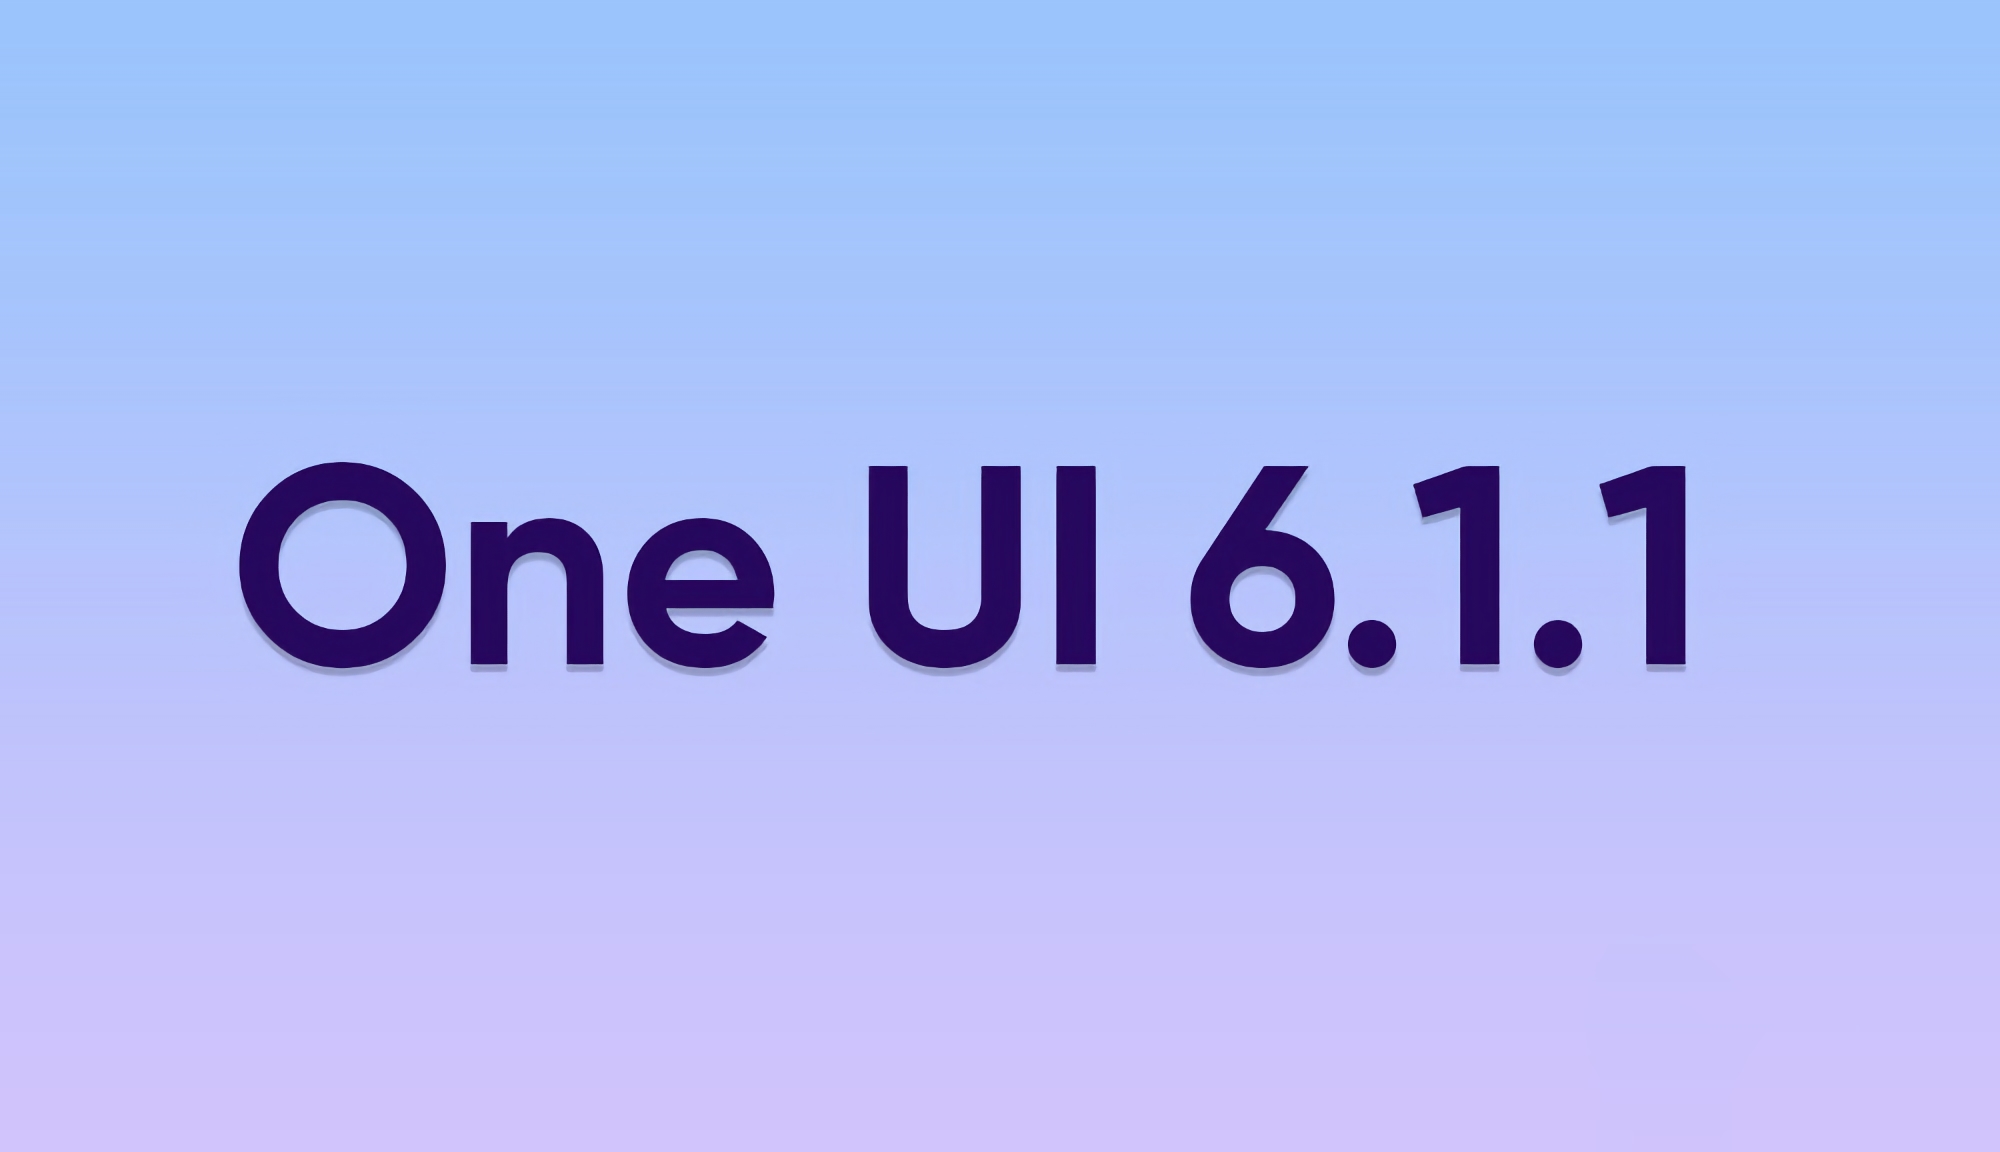 Which Samsung Galaxy smartphones and tablets will receive the One UI 6.1.1 update 